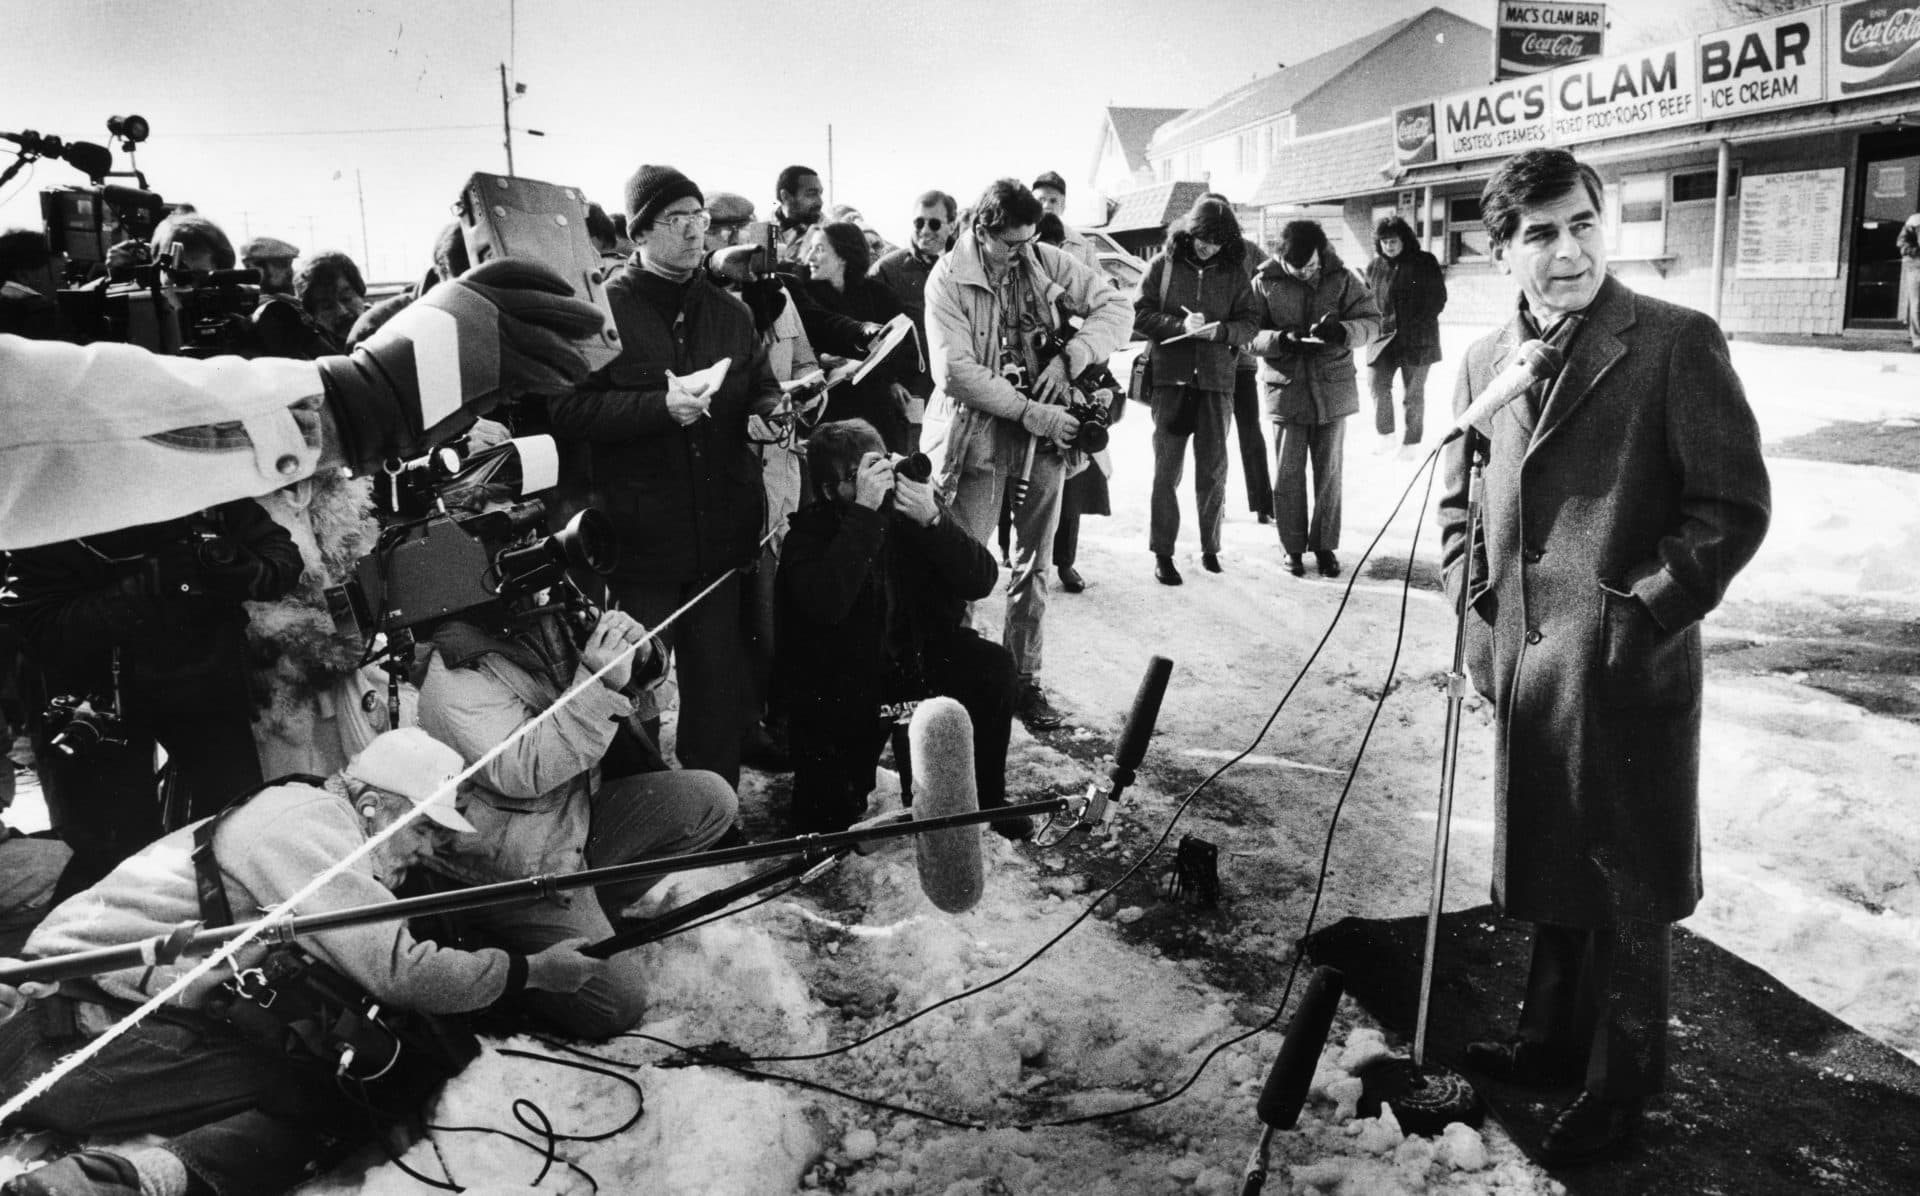 Mike Dukakis holds a press conference in front of Mac's Clam Bar in Seabrook, N.H. in 1988. (Barry Chin/The Boston Globe via Getty Images)